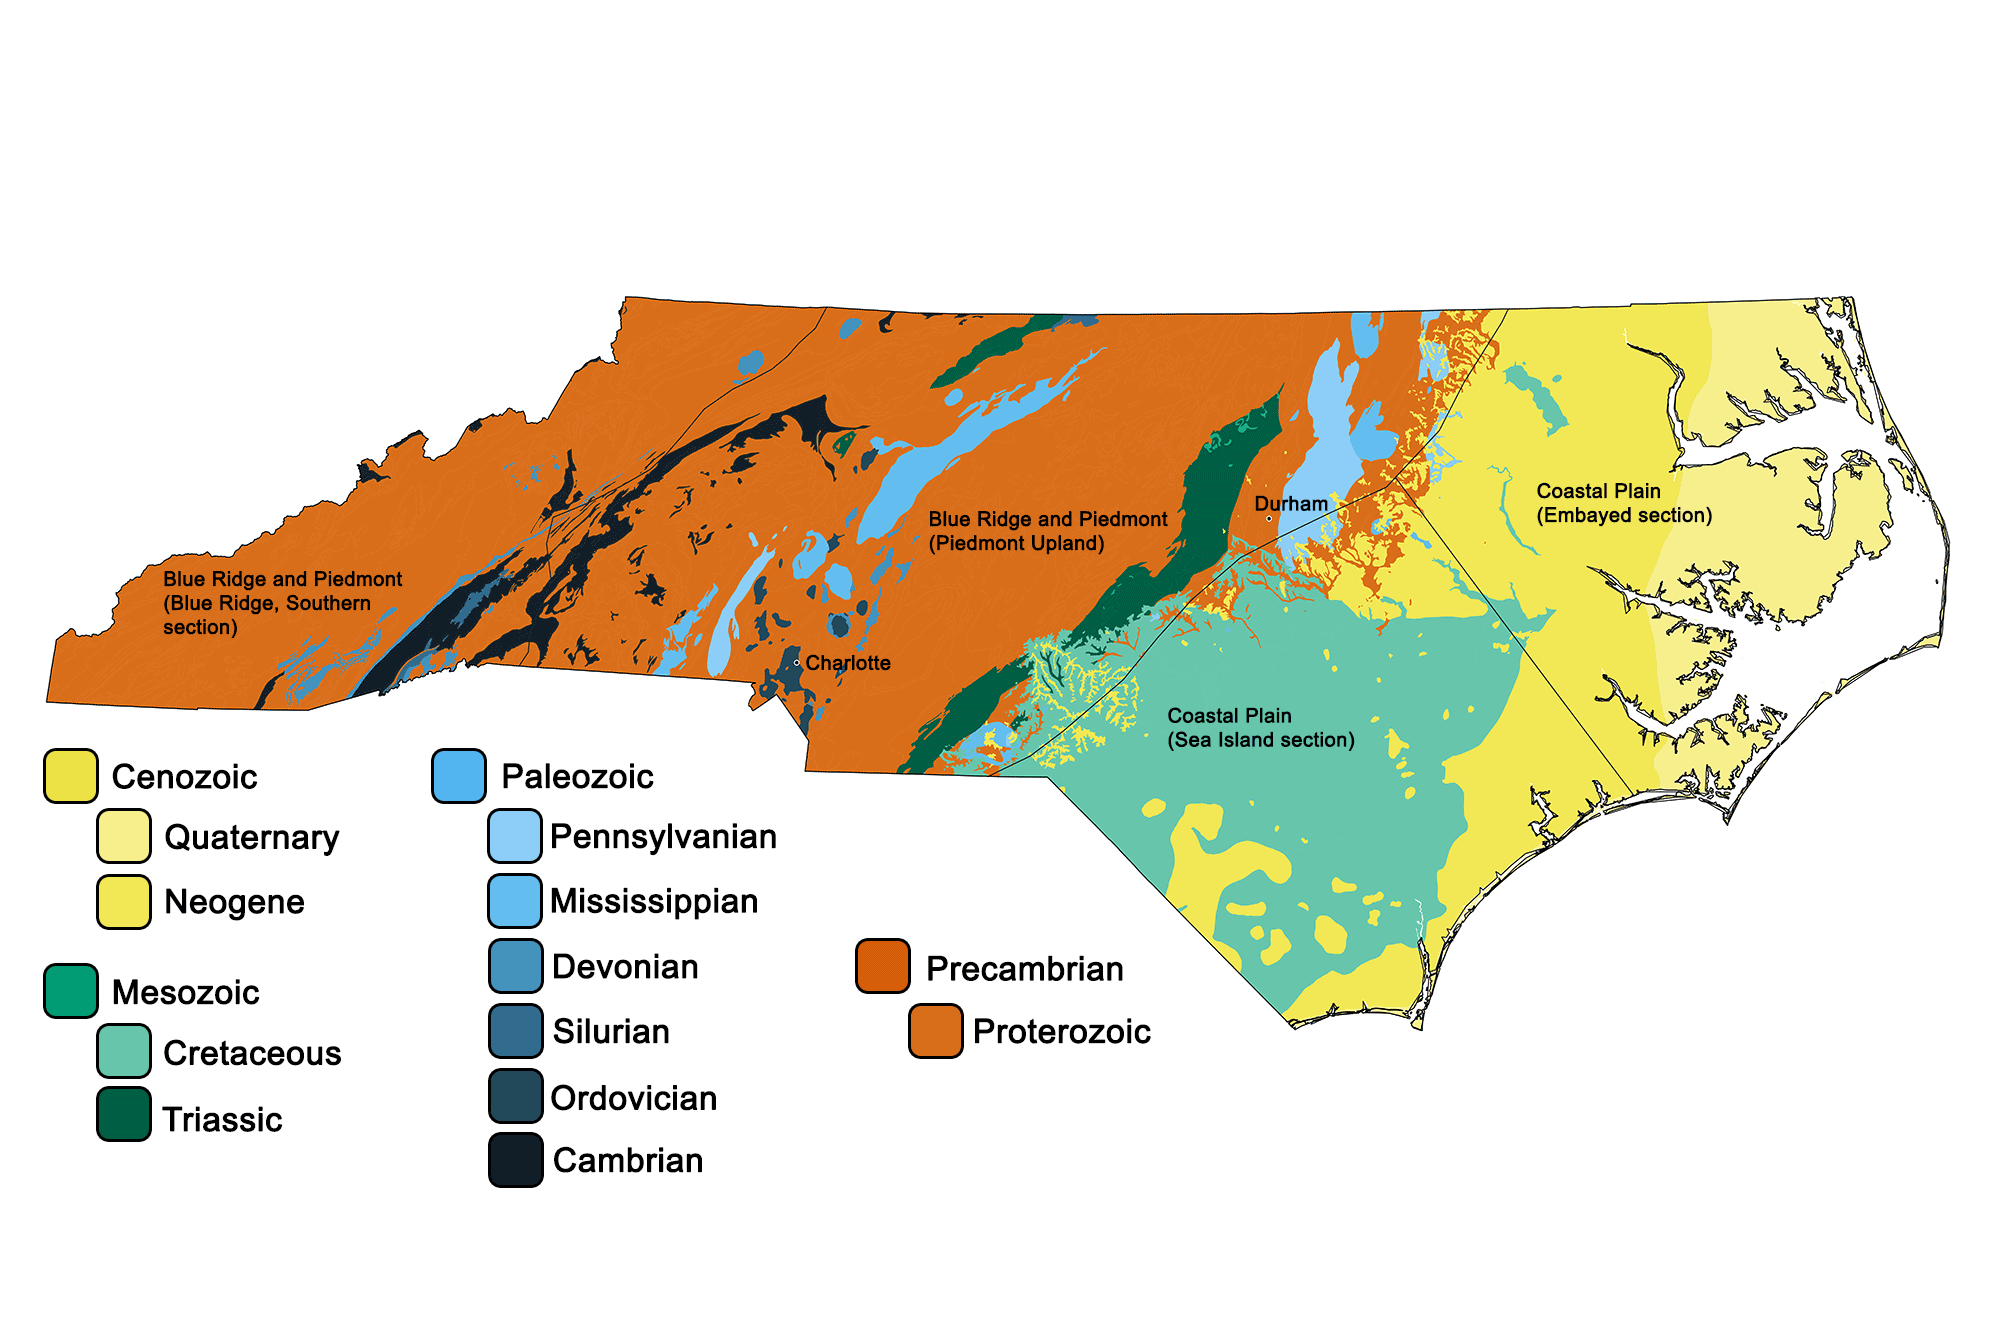 Geologic map of North Carolina with physiographic regions identified.